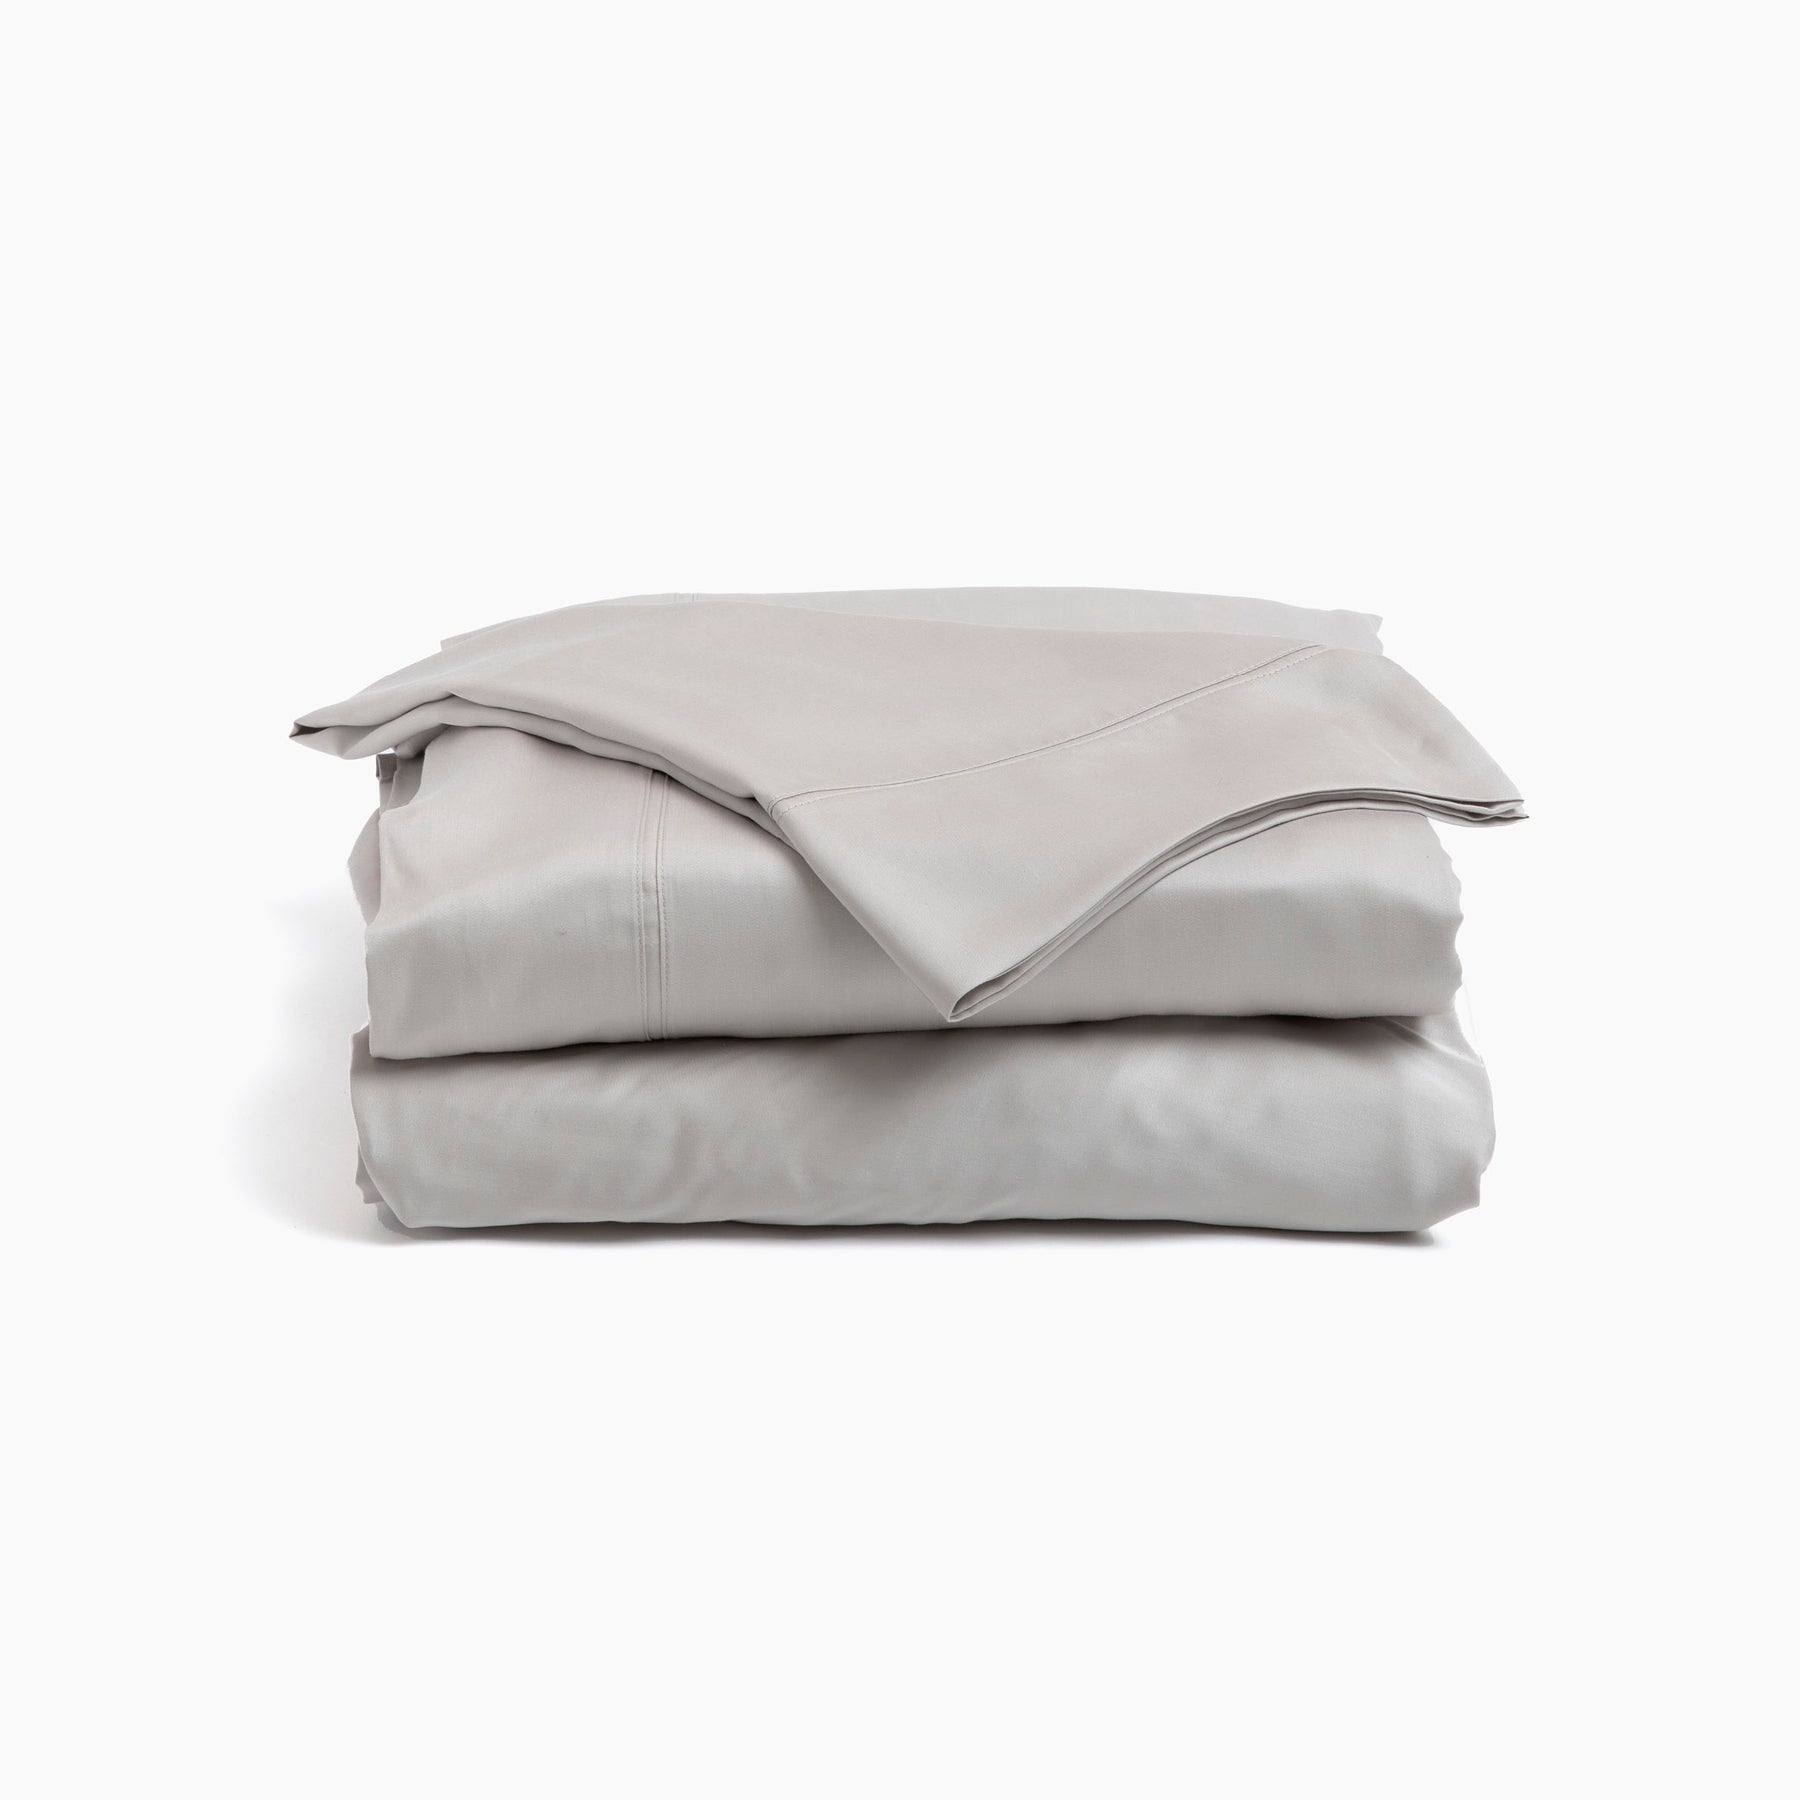 Image showcasing entire Dove Gray Recovery Viscose Sheet Set all neatly folded on top of one another with a white background. The image shows (from top to bottom): pillowcase, flat sheet, fitted sheet